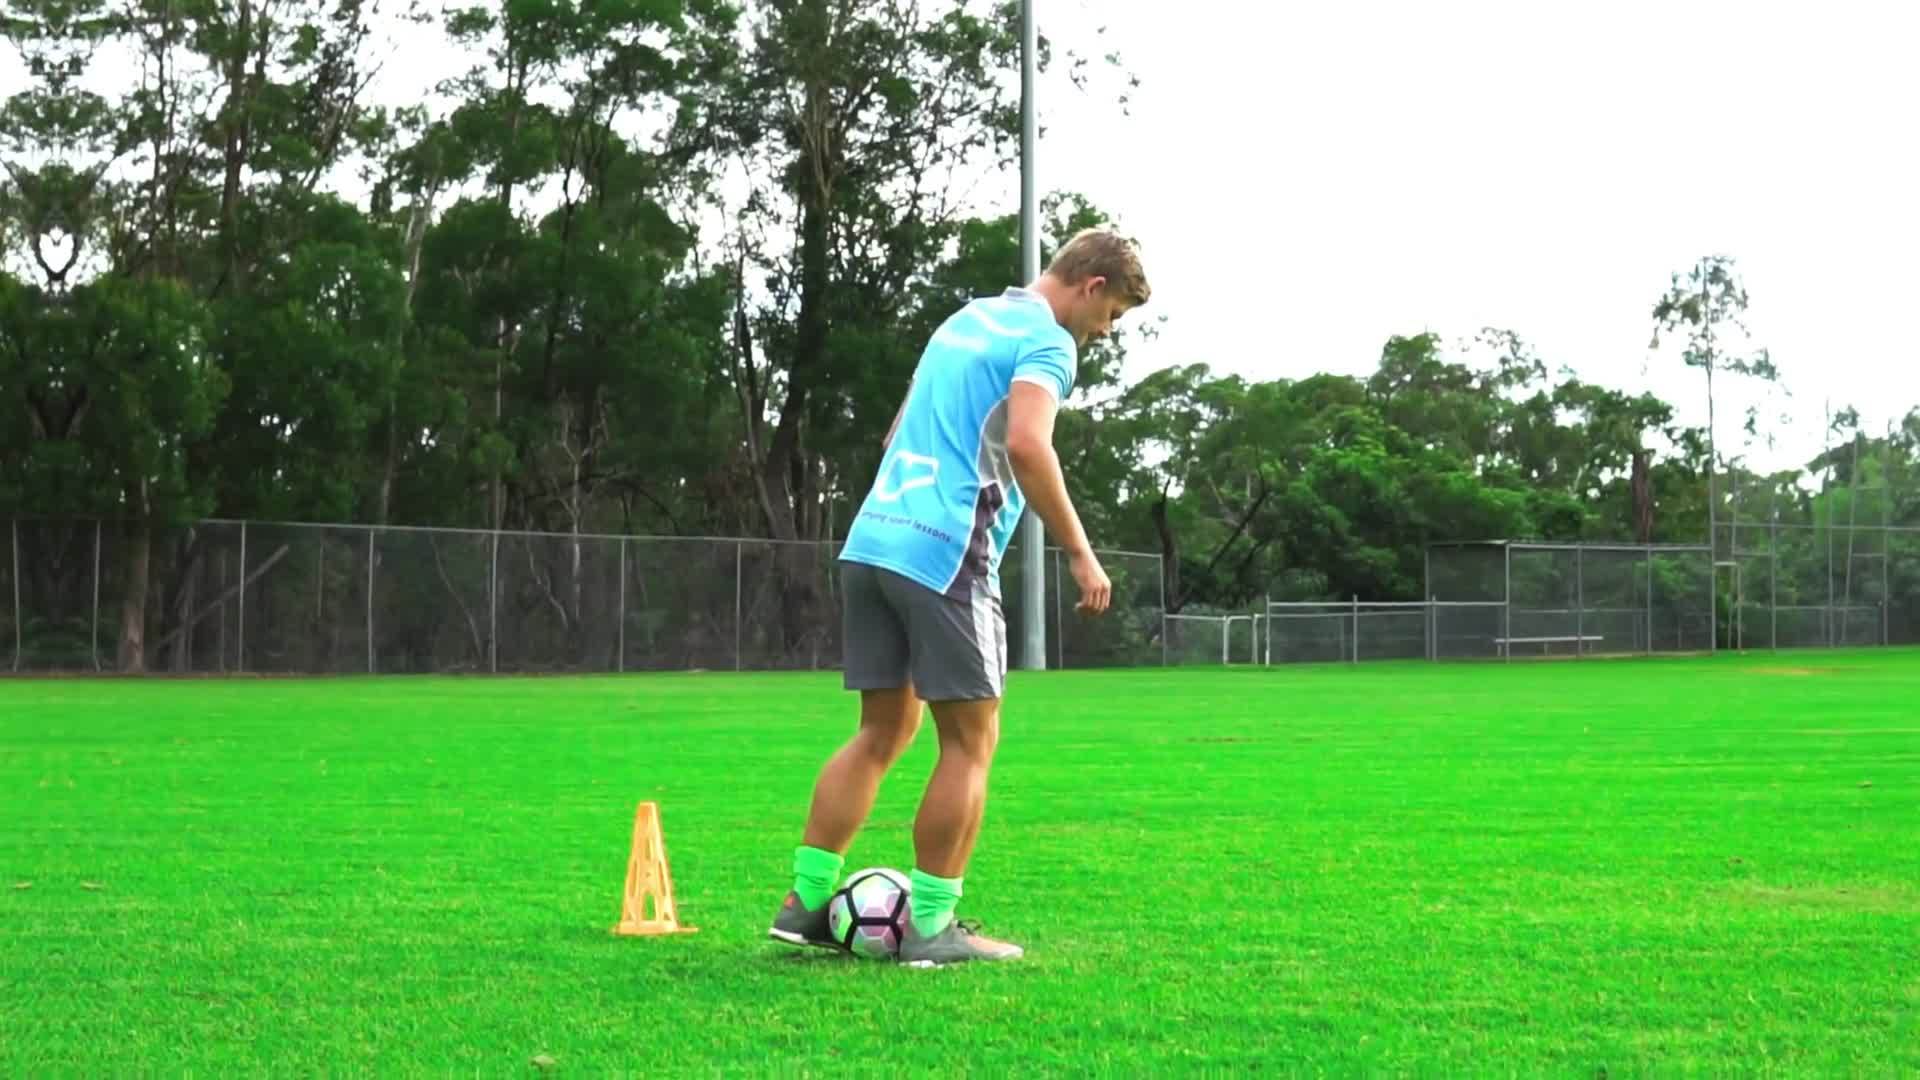 Individual soccer trick challenges